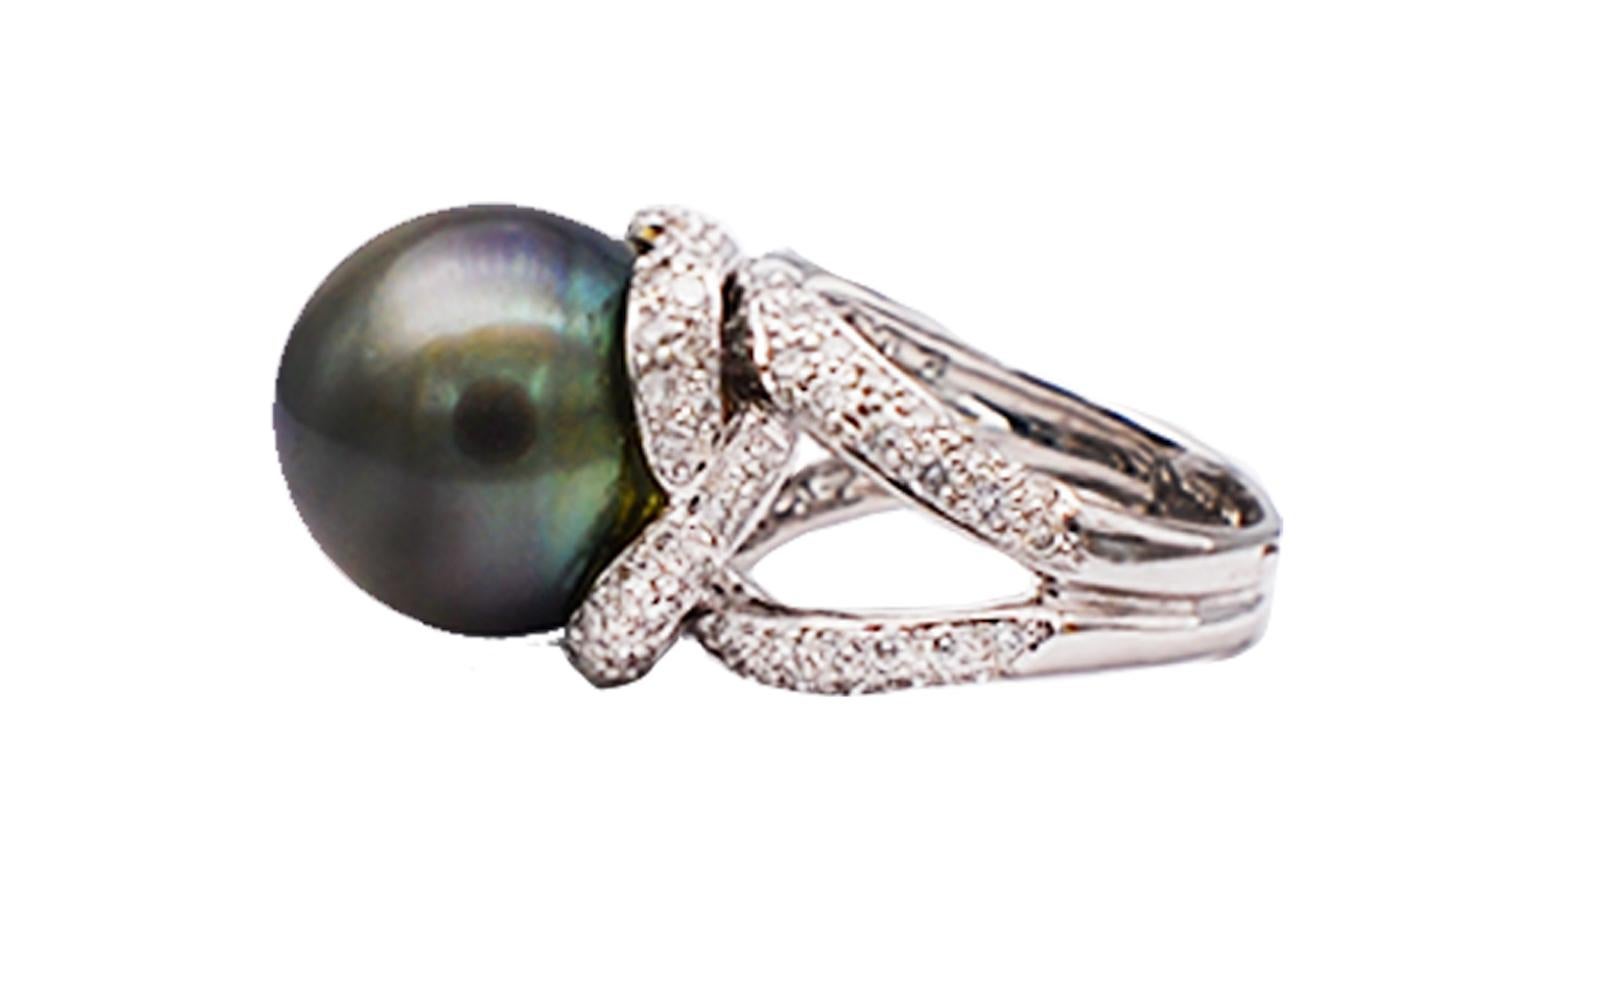 JYE Award, Tahitian 14.5 mm Quality, 18Kt White Diamond Ring.
JYE Award Winners designer Hallmarked quality ring. Stunning Tahitian Grey Pearl 14.50 mm. Consistent color hue, brilliant luster. Diamonds are set on an 18 kt. Split shank with wrapped